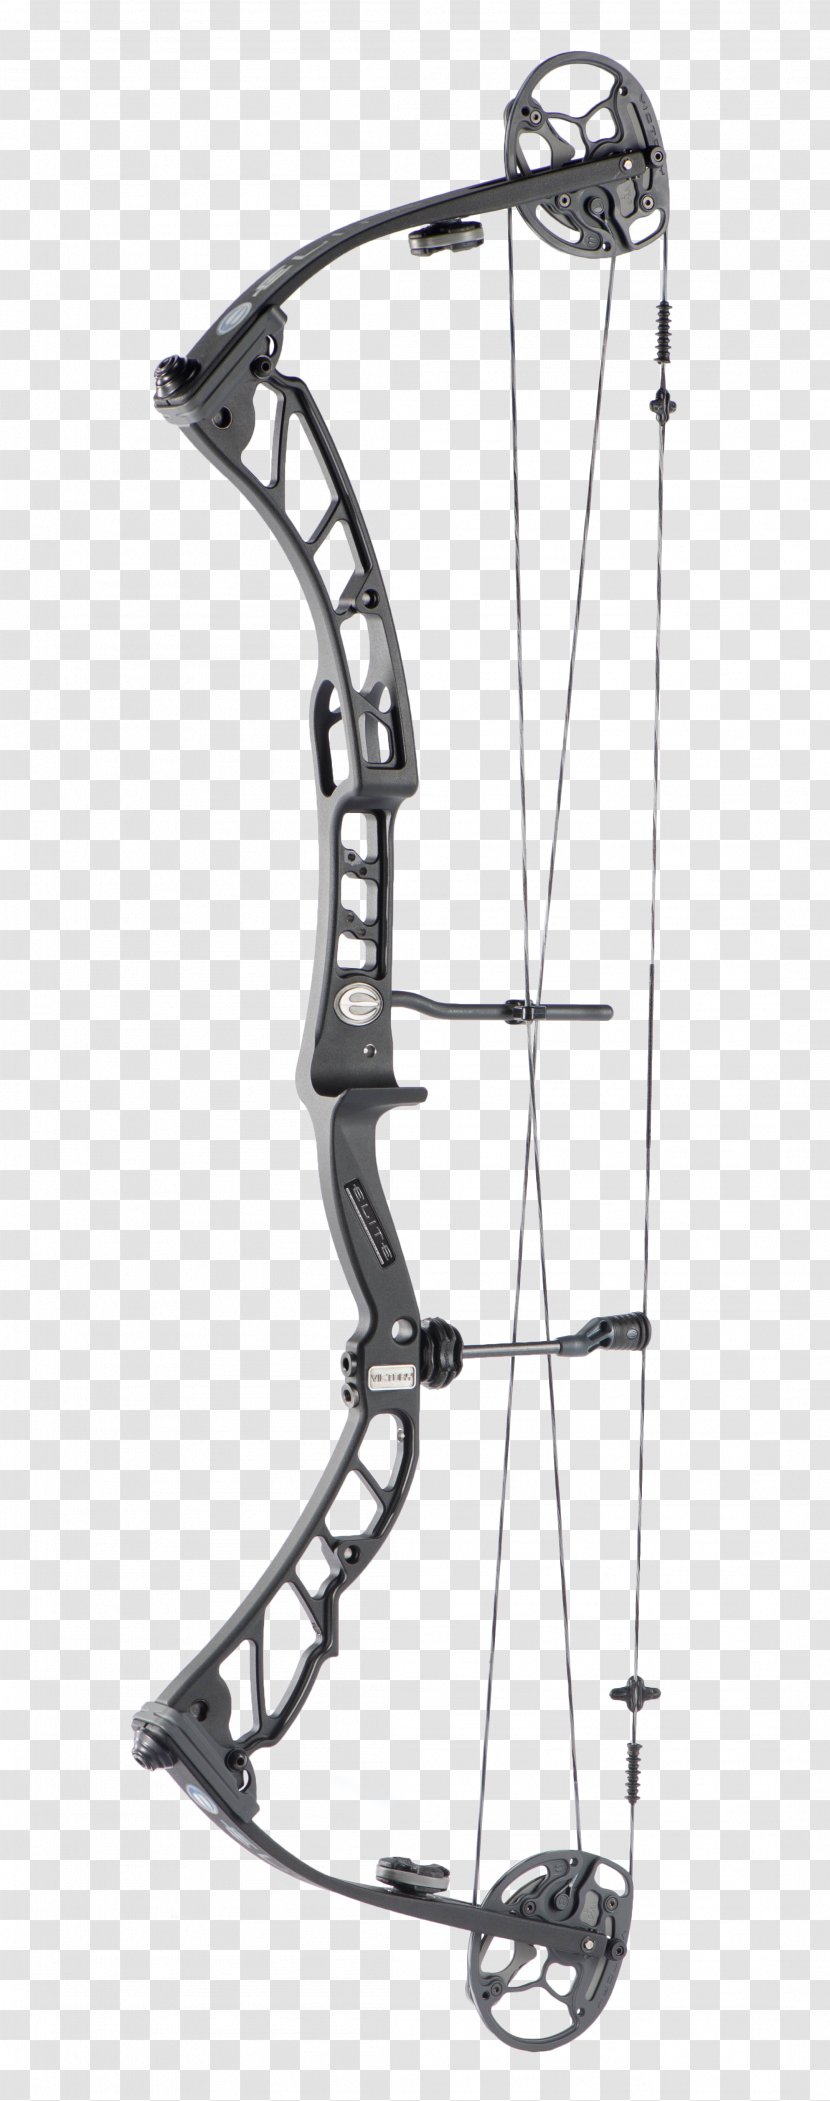 Compound Bows Bow And Arrow Archery Bowhunting - Cover Transparent PNG